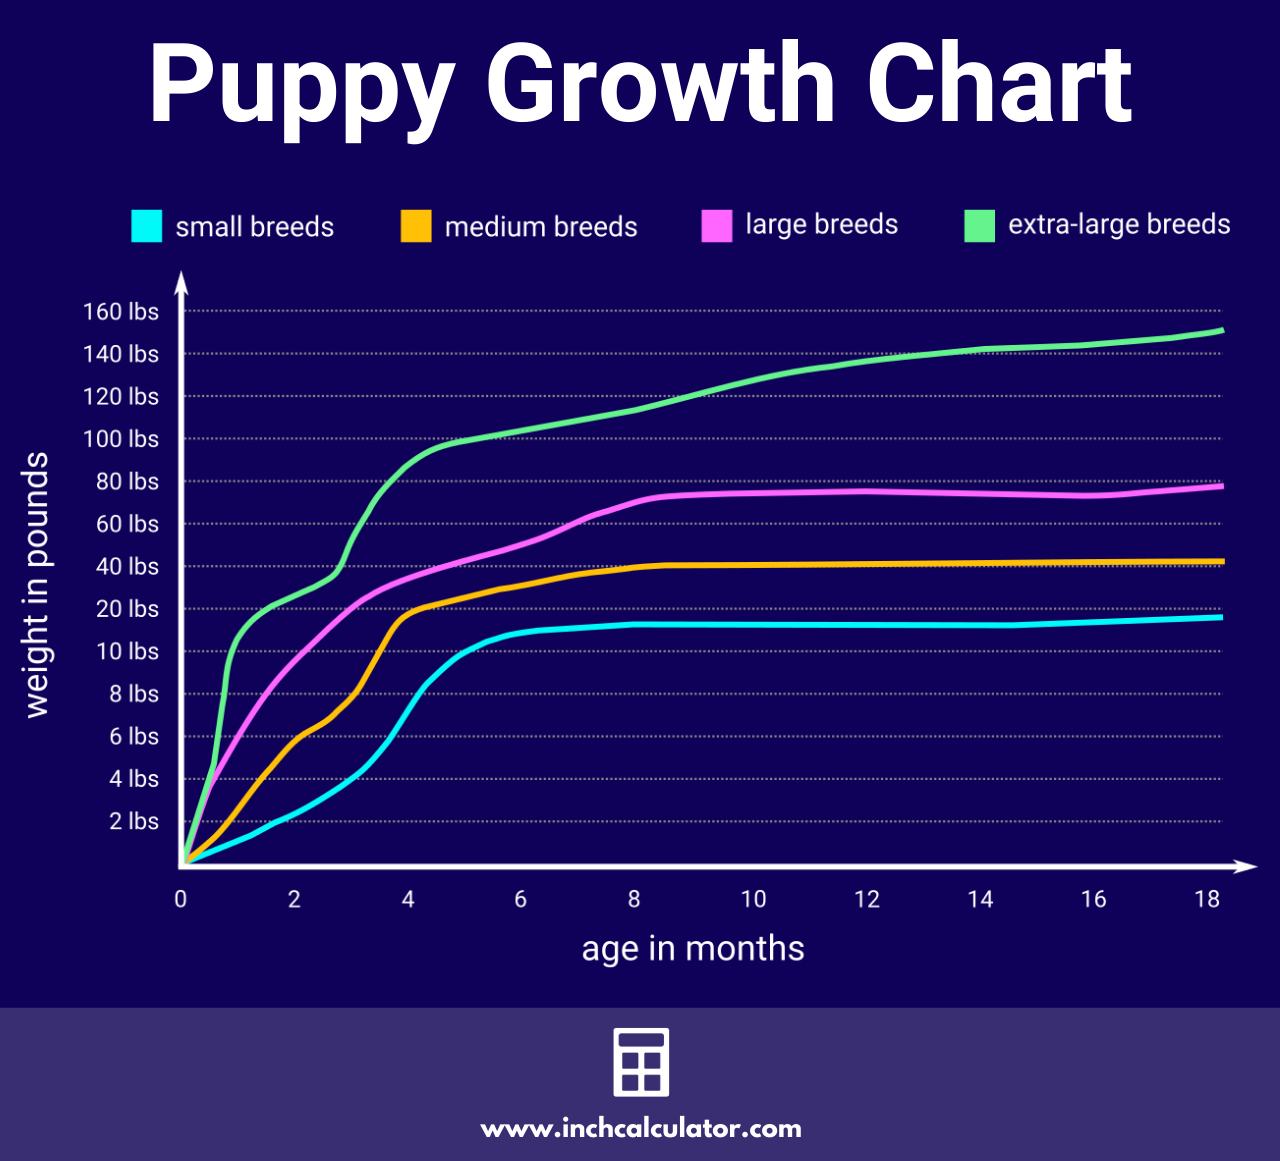 chihuahua weight chart in pounds